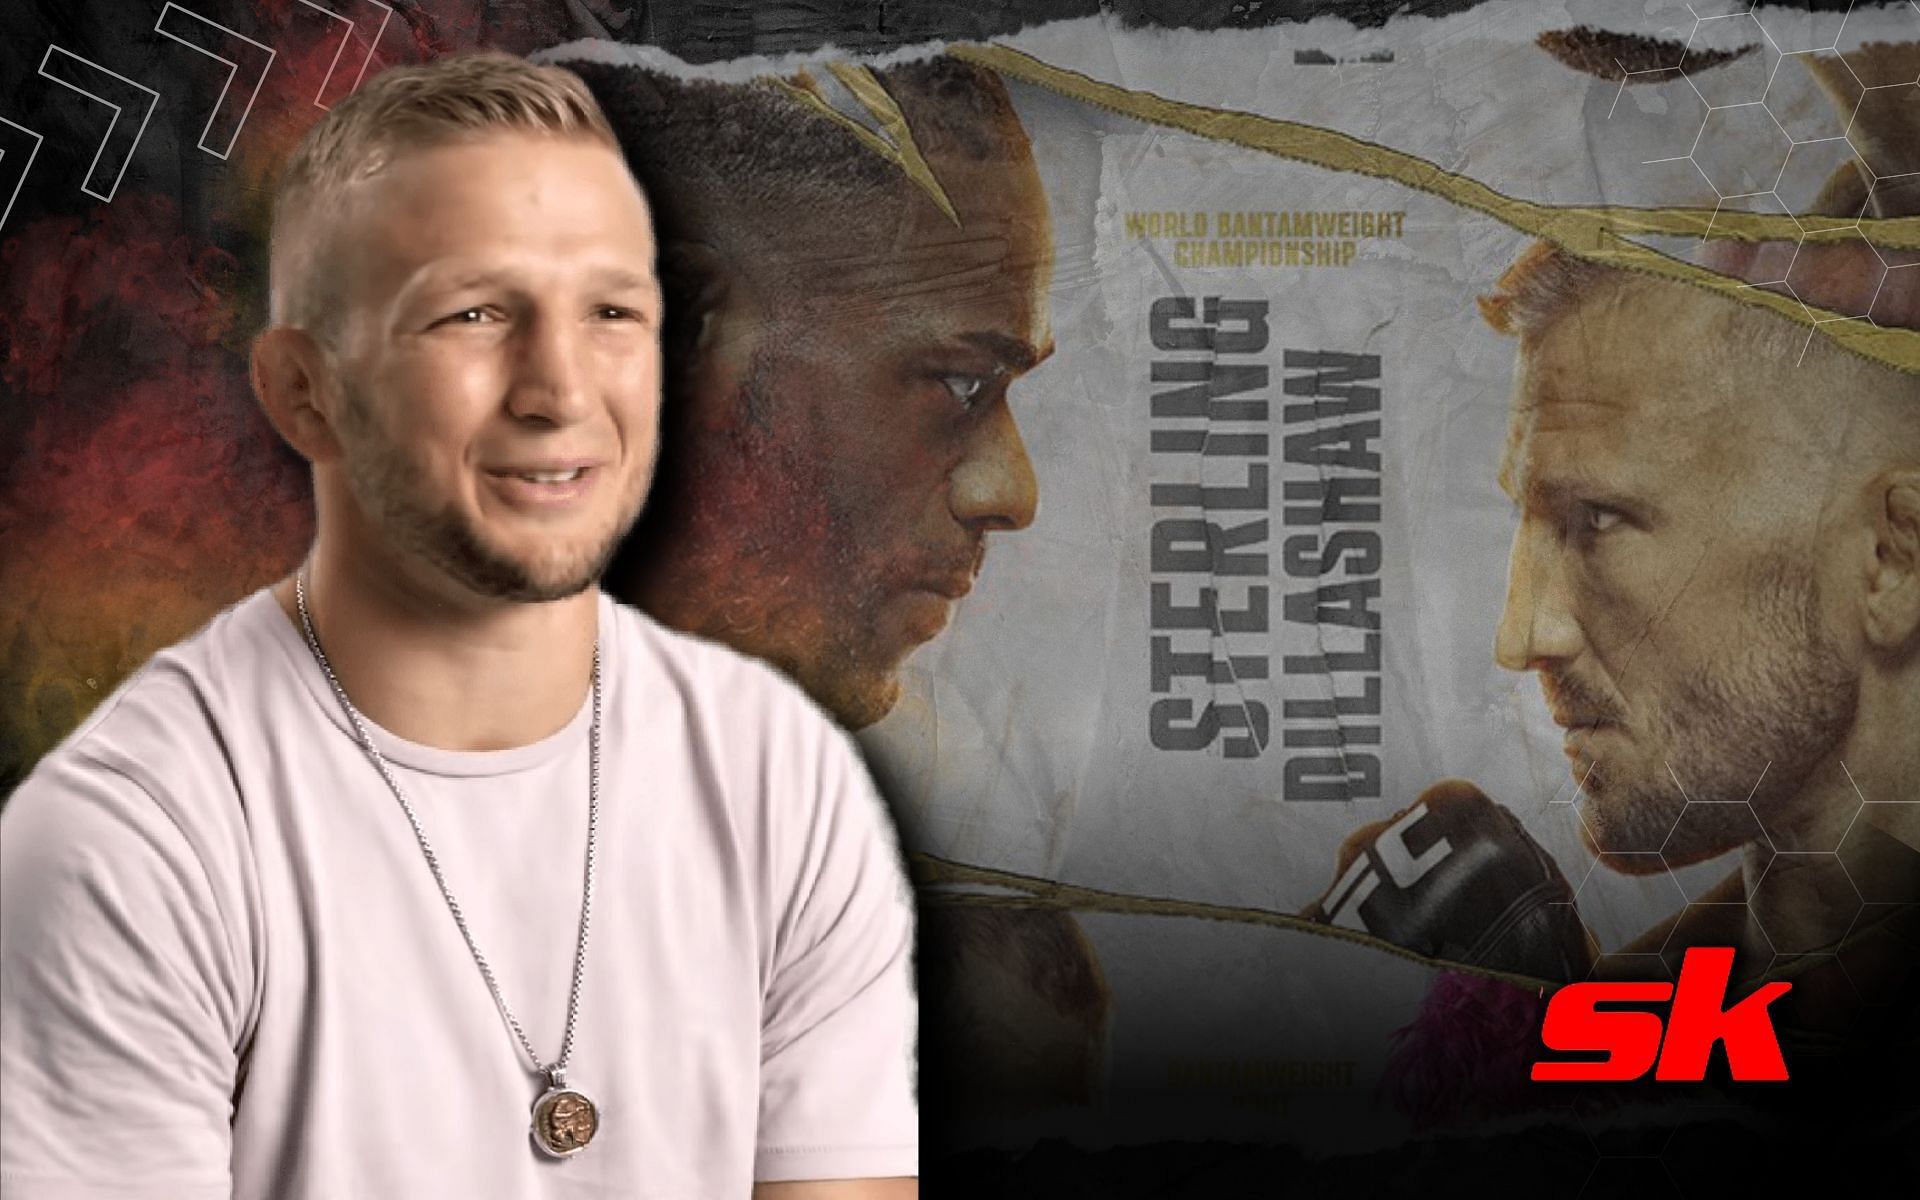 T.J. Dillashaw feels confident he can outclass Aljamain Sterling [Images via GQ on YouTube and @btsportufc on Twitter]